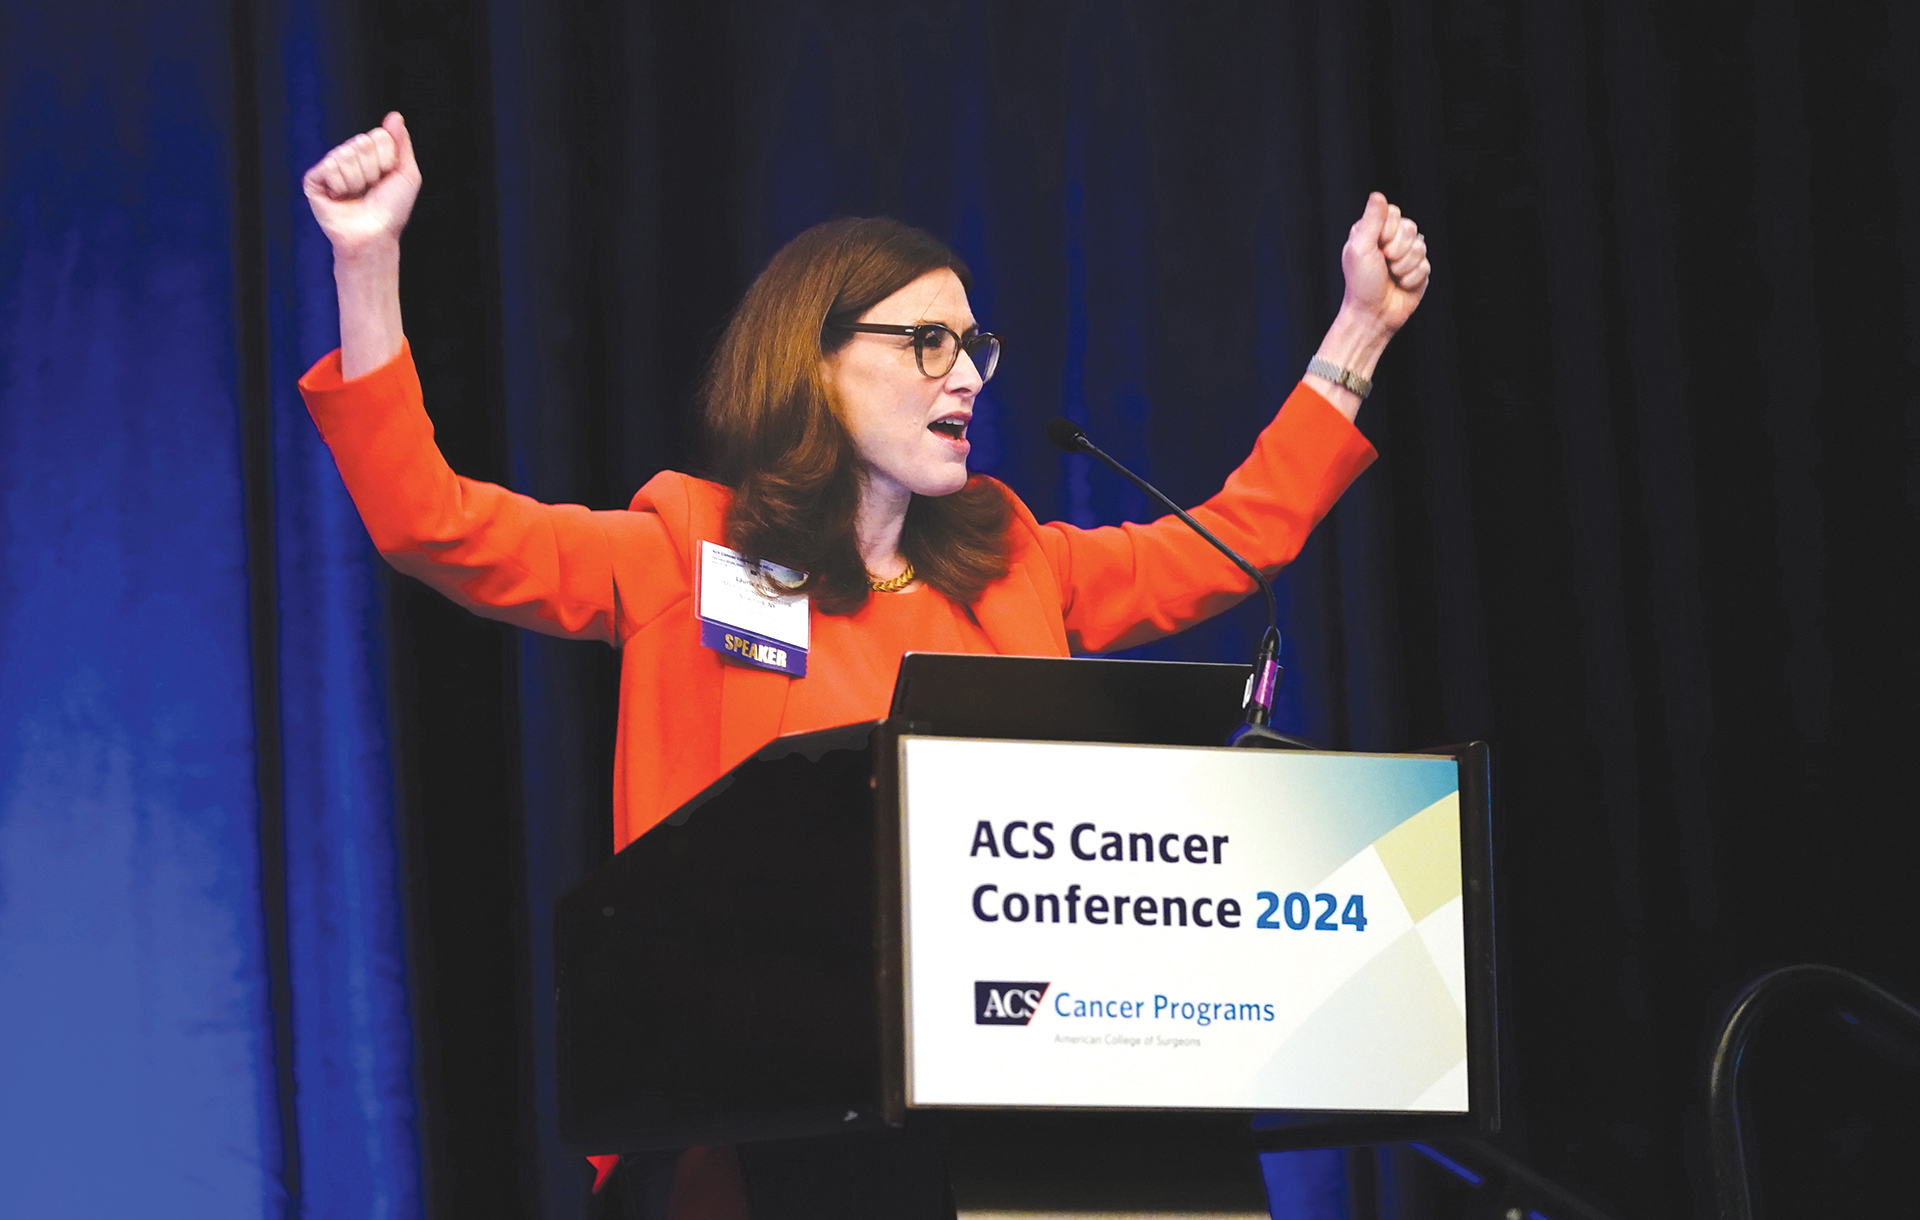 ACS Cancer Conference Highlights Quality Efforts, Current Complexities in Cancer Care